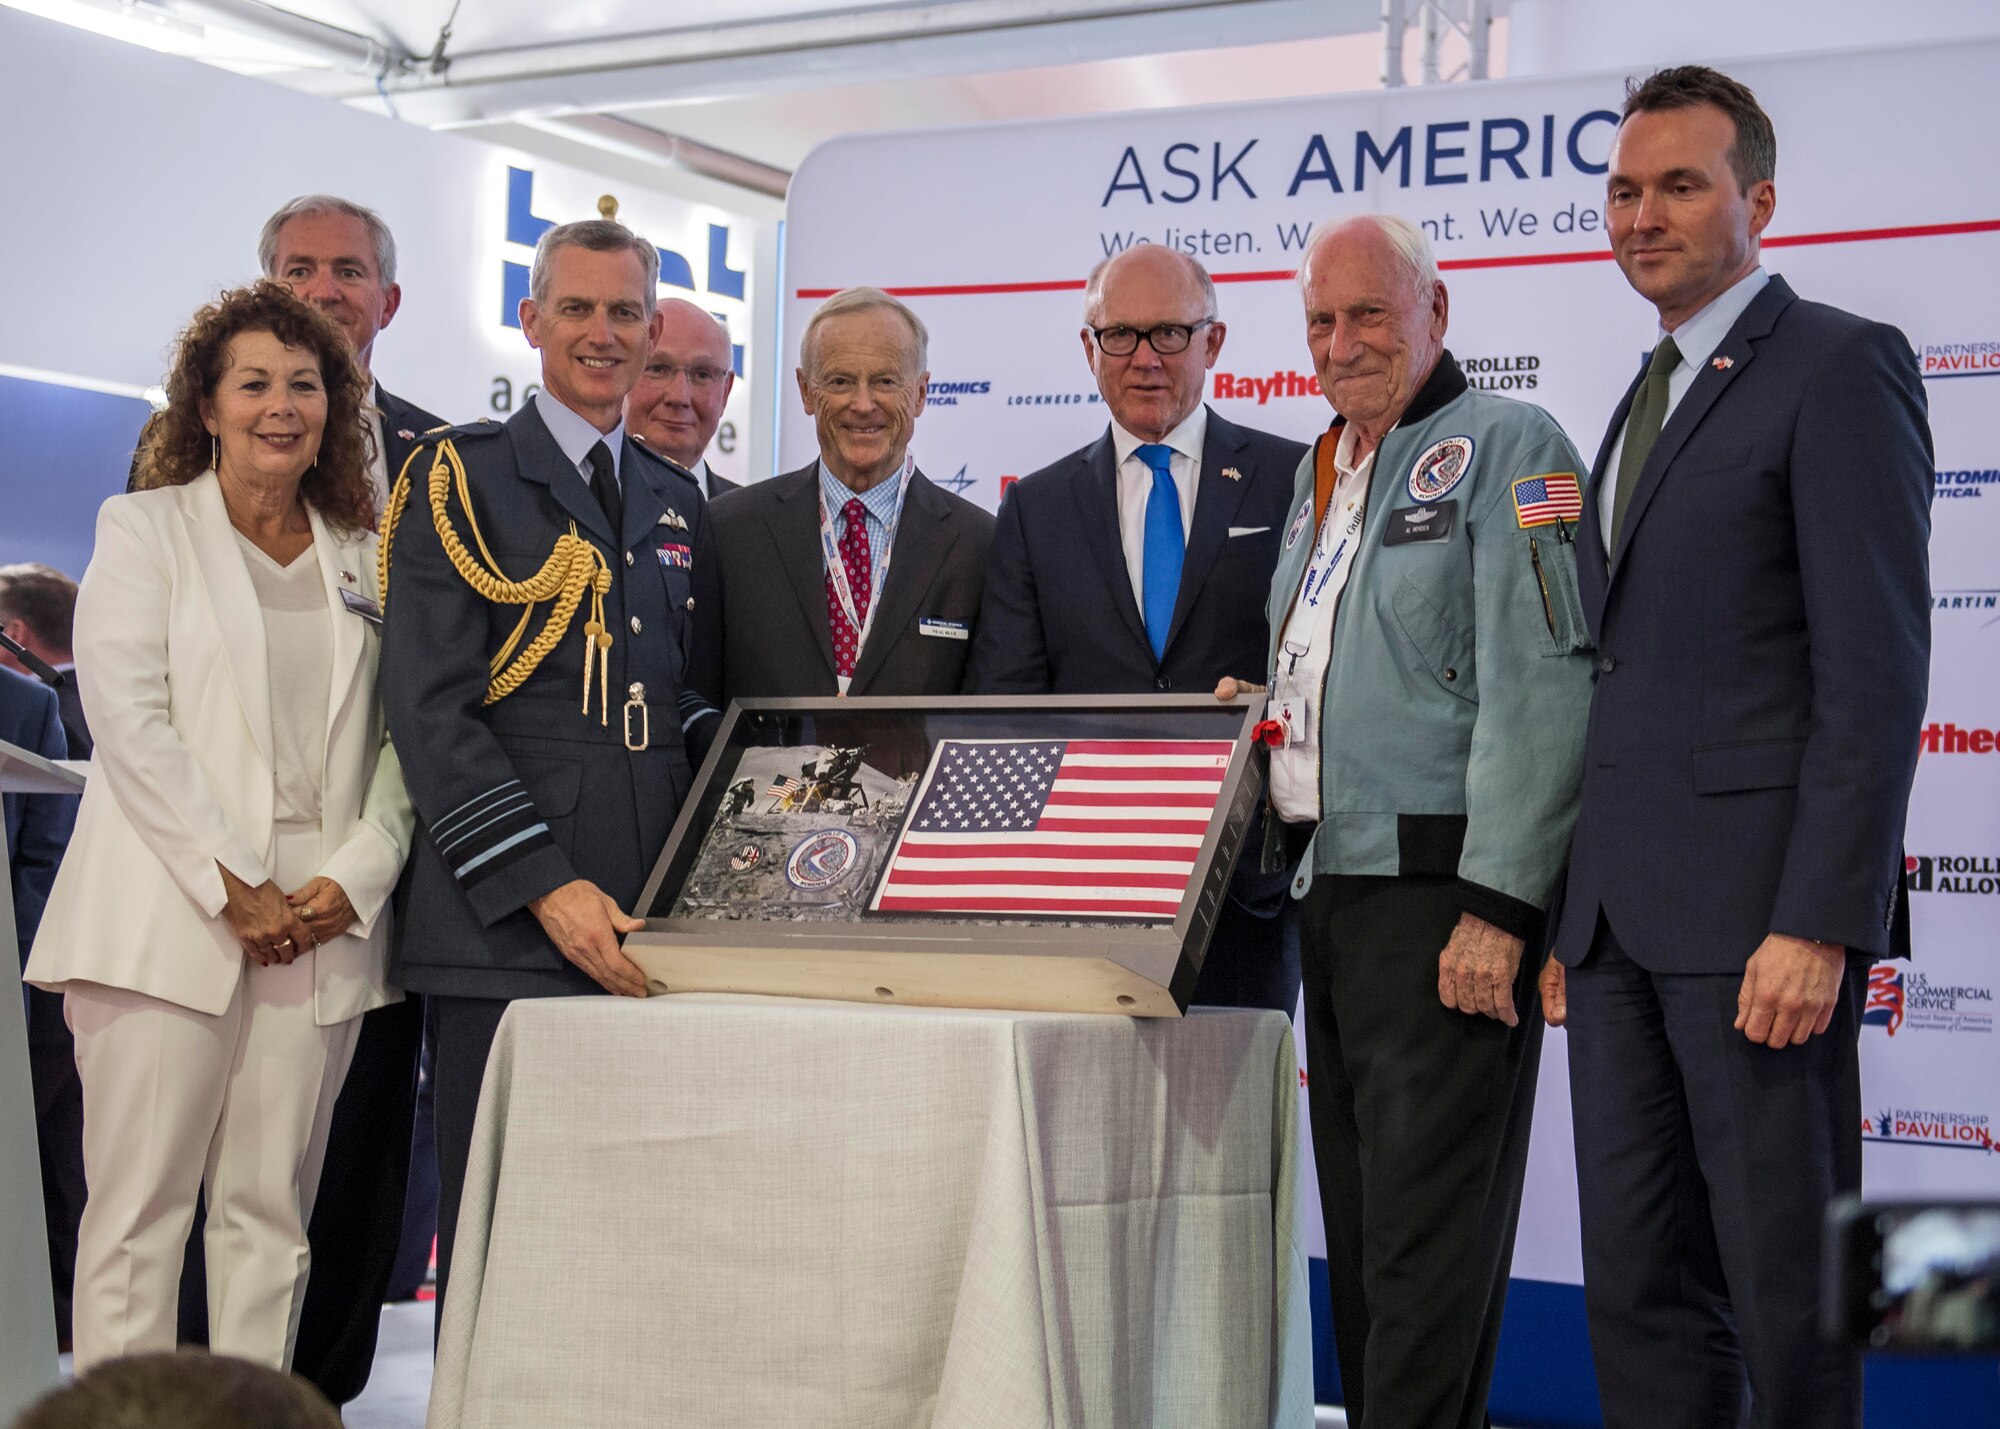 U.S. and U.K. guests of honor pose for a photo following the opening ceremony of the Farnborough International Airshow July 16, 2018. The ceremony featured an Apollo 15 flag presentation to the Royal Air Force Chief of Staff, Air Chief Marshal Sir Stephen Hillier, to commemorate their RAF centennial celebration. U.S. guests of honor included: the Honorable Robert Wood Johnson, U.S. Ambassador to the U.K., 22nd Secretary of the Army Eric Fanning, and Retired Col. Al Woden, Command Module Pilot for the Apollo 15 lunar mission in 1971. (U.S. Navy photo by MC2 Cody Hendrix)